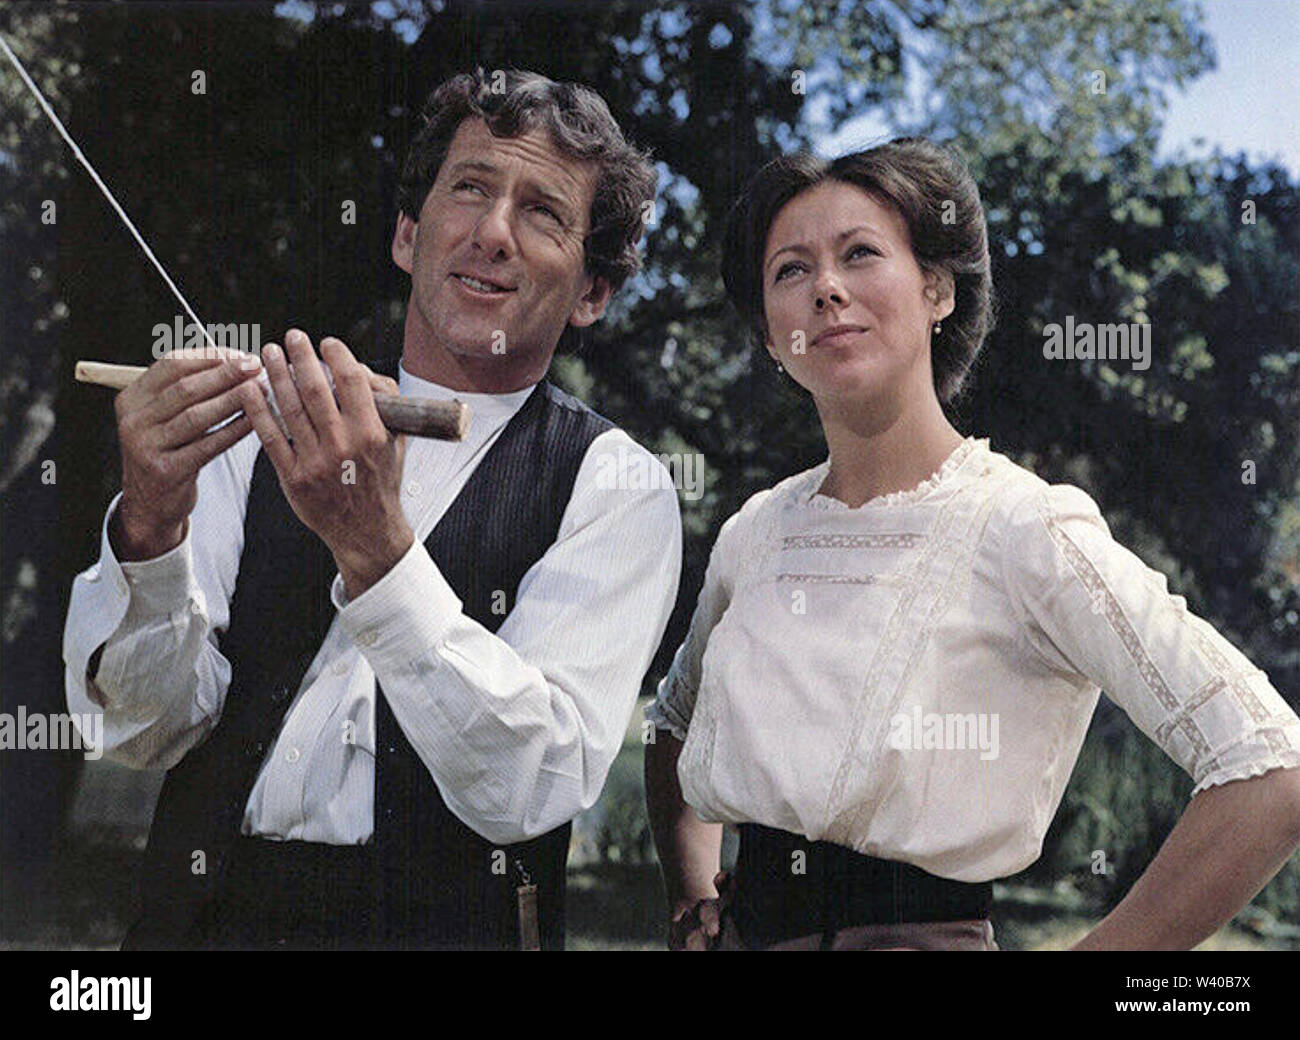 AMY 1981 Buena Vista film with Jenny Agutter and Barry Newman Stock Photo